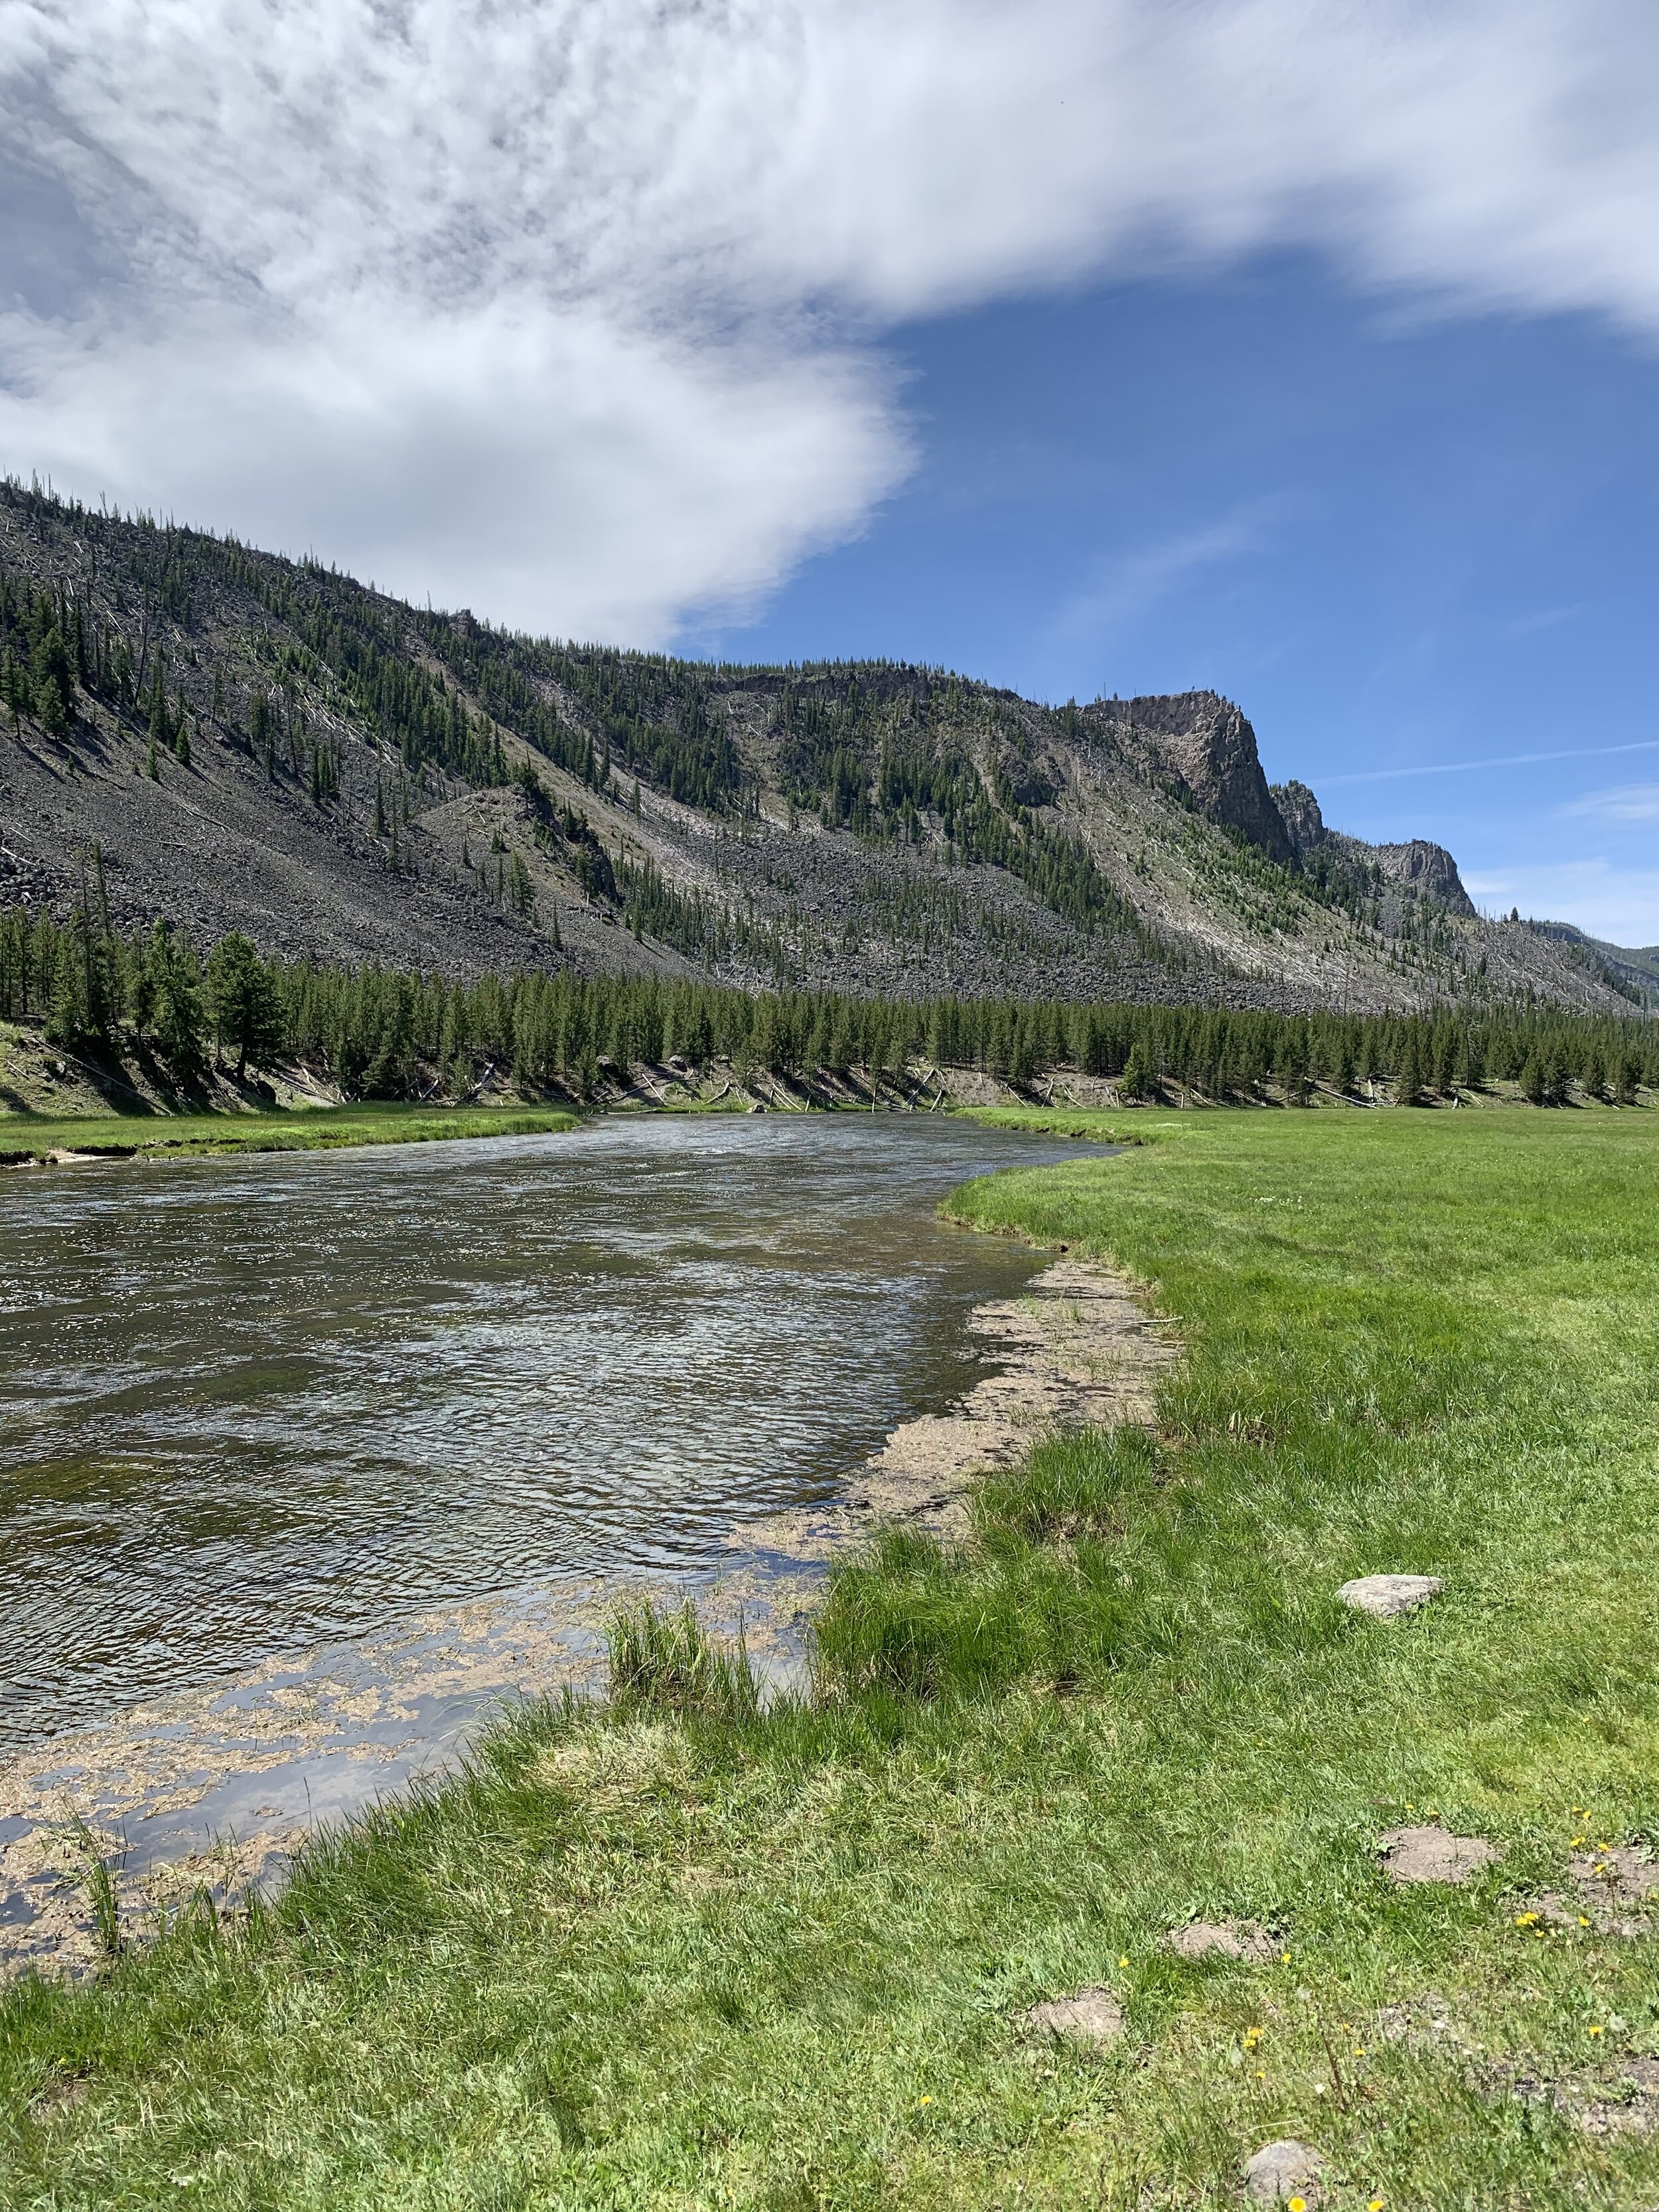  We stopped immediately upon arrival into Yellowstone National Park and took a picture of this peaceful stream. It felt like we should see  bear, elk or moose or  something  enjoying a cool drink or fishing for salmon. A primary objective of the day 